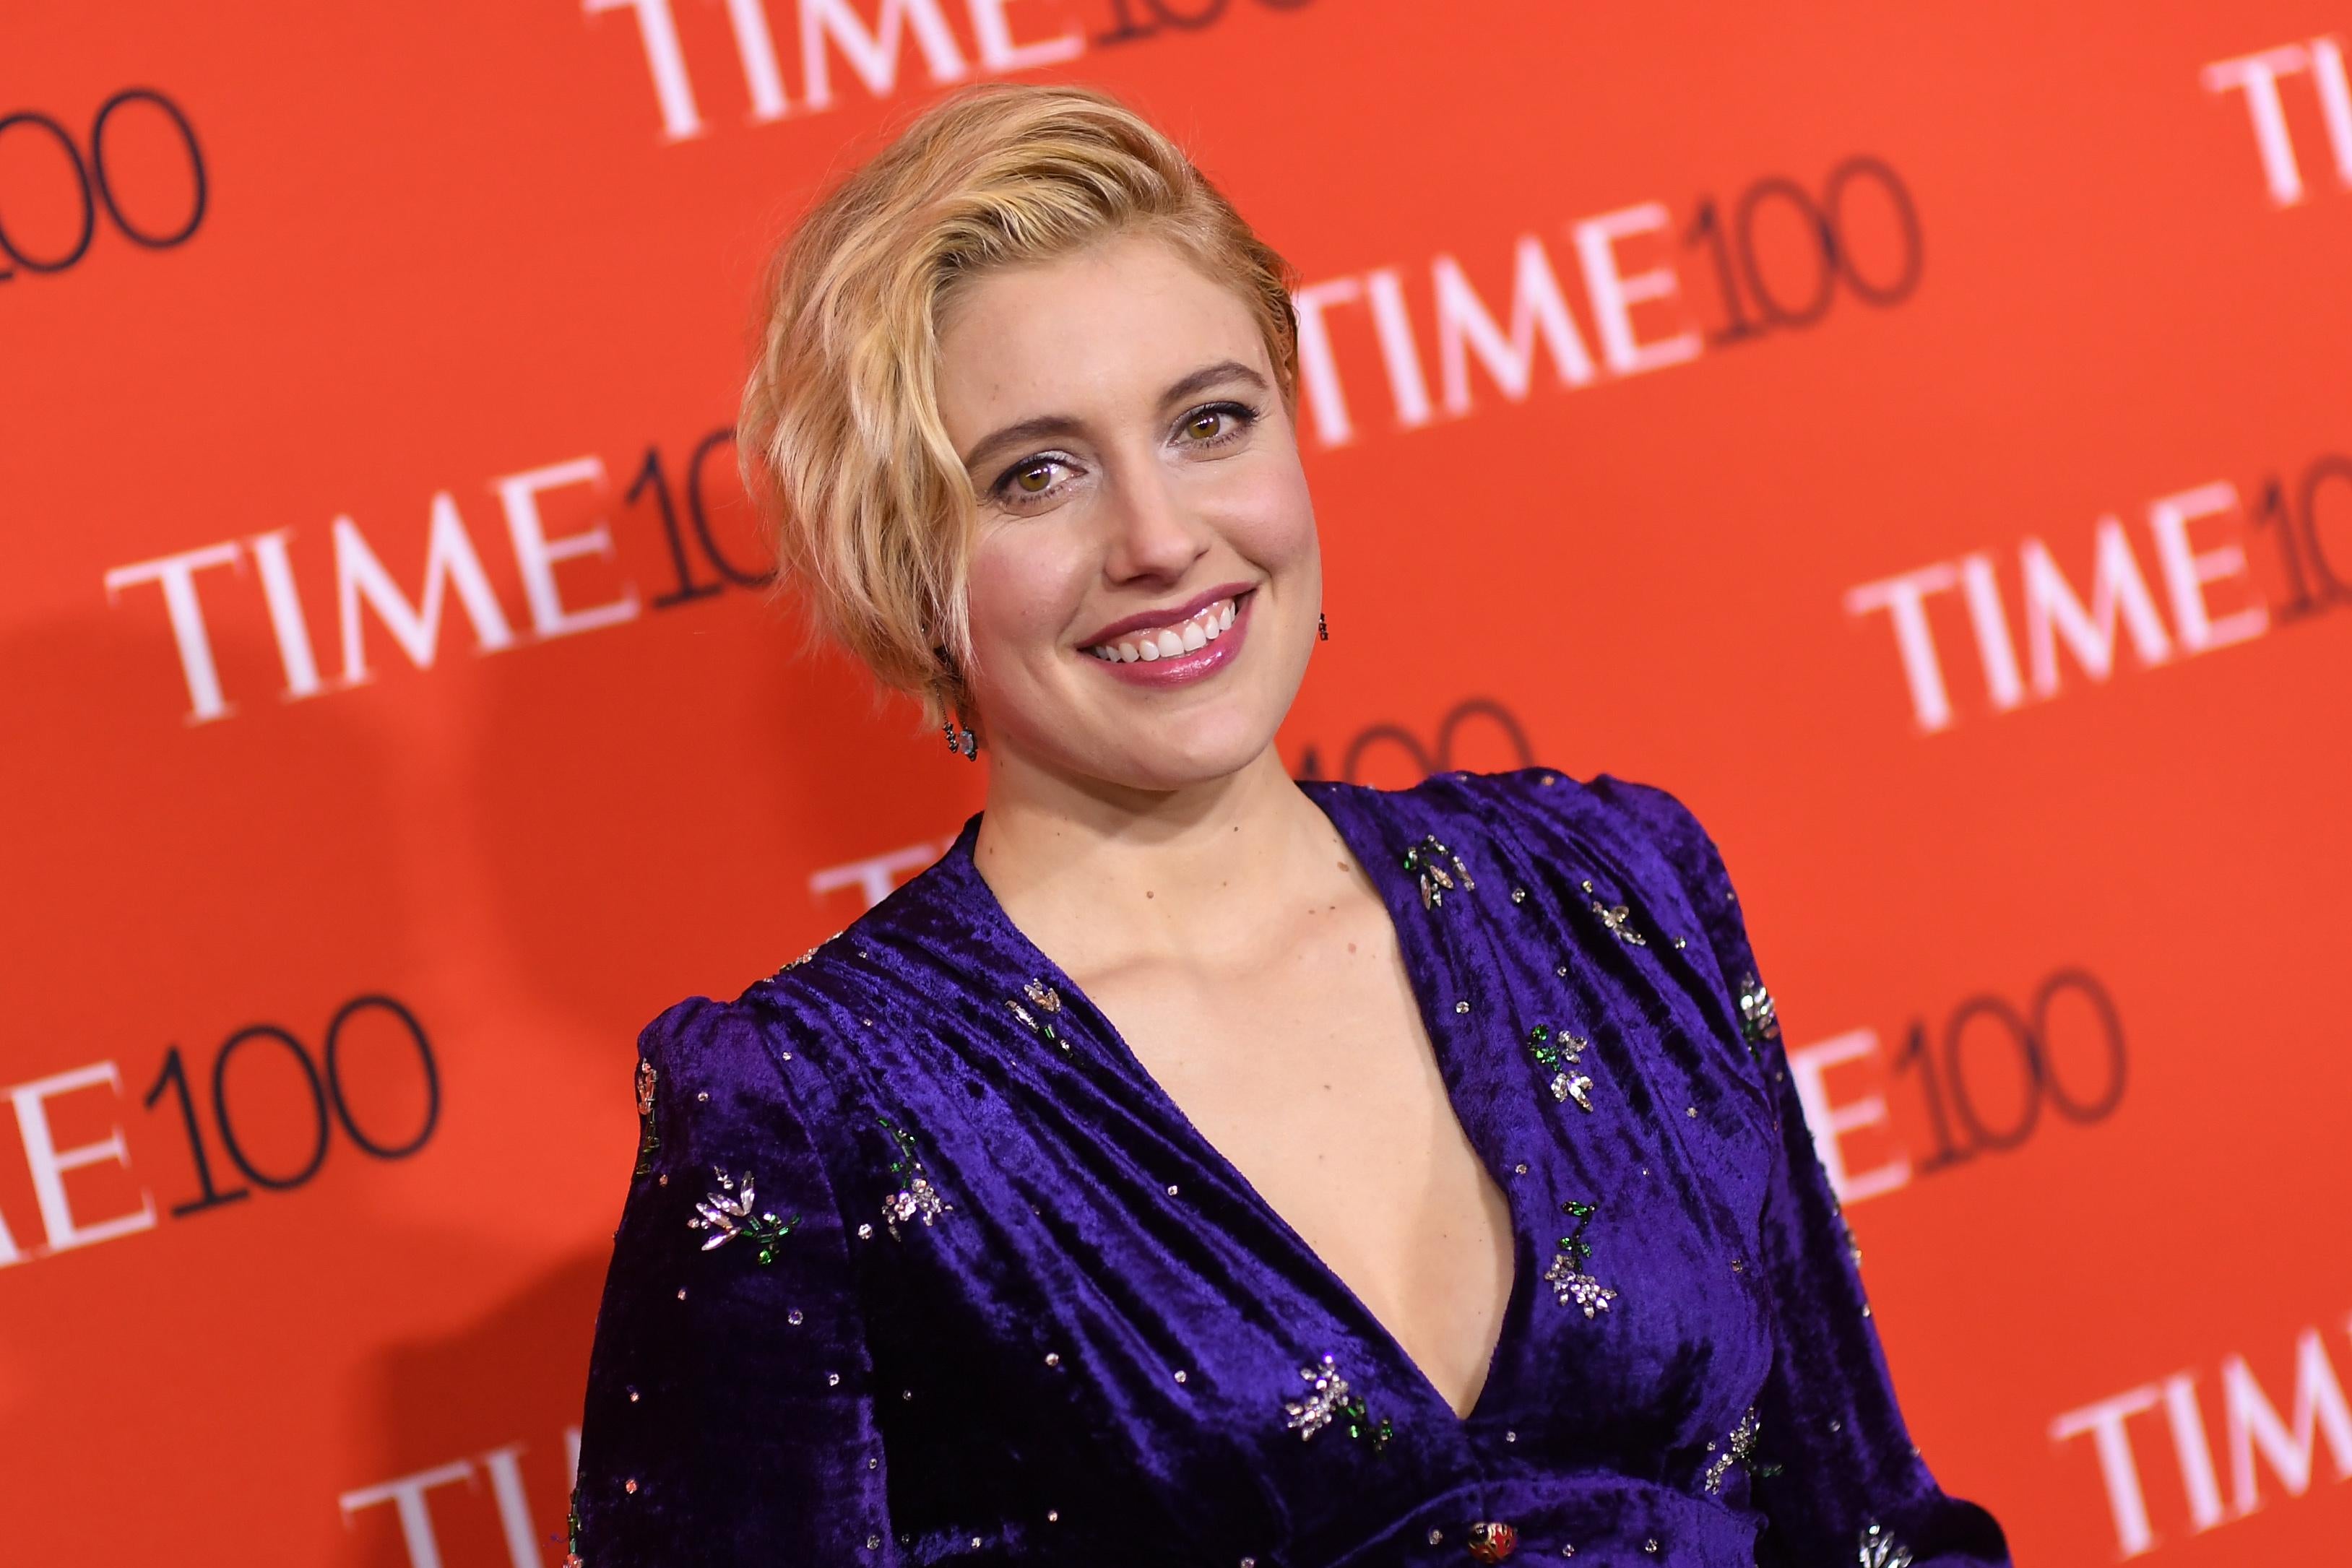 Greta Gerwig attends the TIME 100 Gala celebrating its annual list of the 100 Most Influential People In The World at Frederick P. Rose Hall, Jazz at Lincoln Center on April 24, 2018 in New York City. (Photo by ANGELA WEISS / AFP)        (Photo credit should read ANGELA WEISS/AFP/Getty Images)